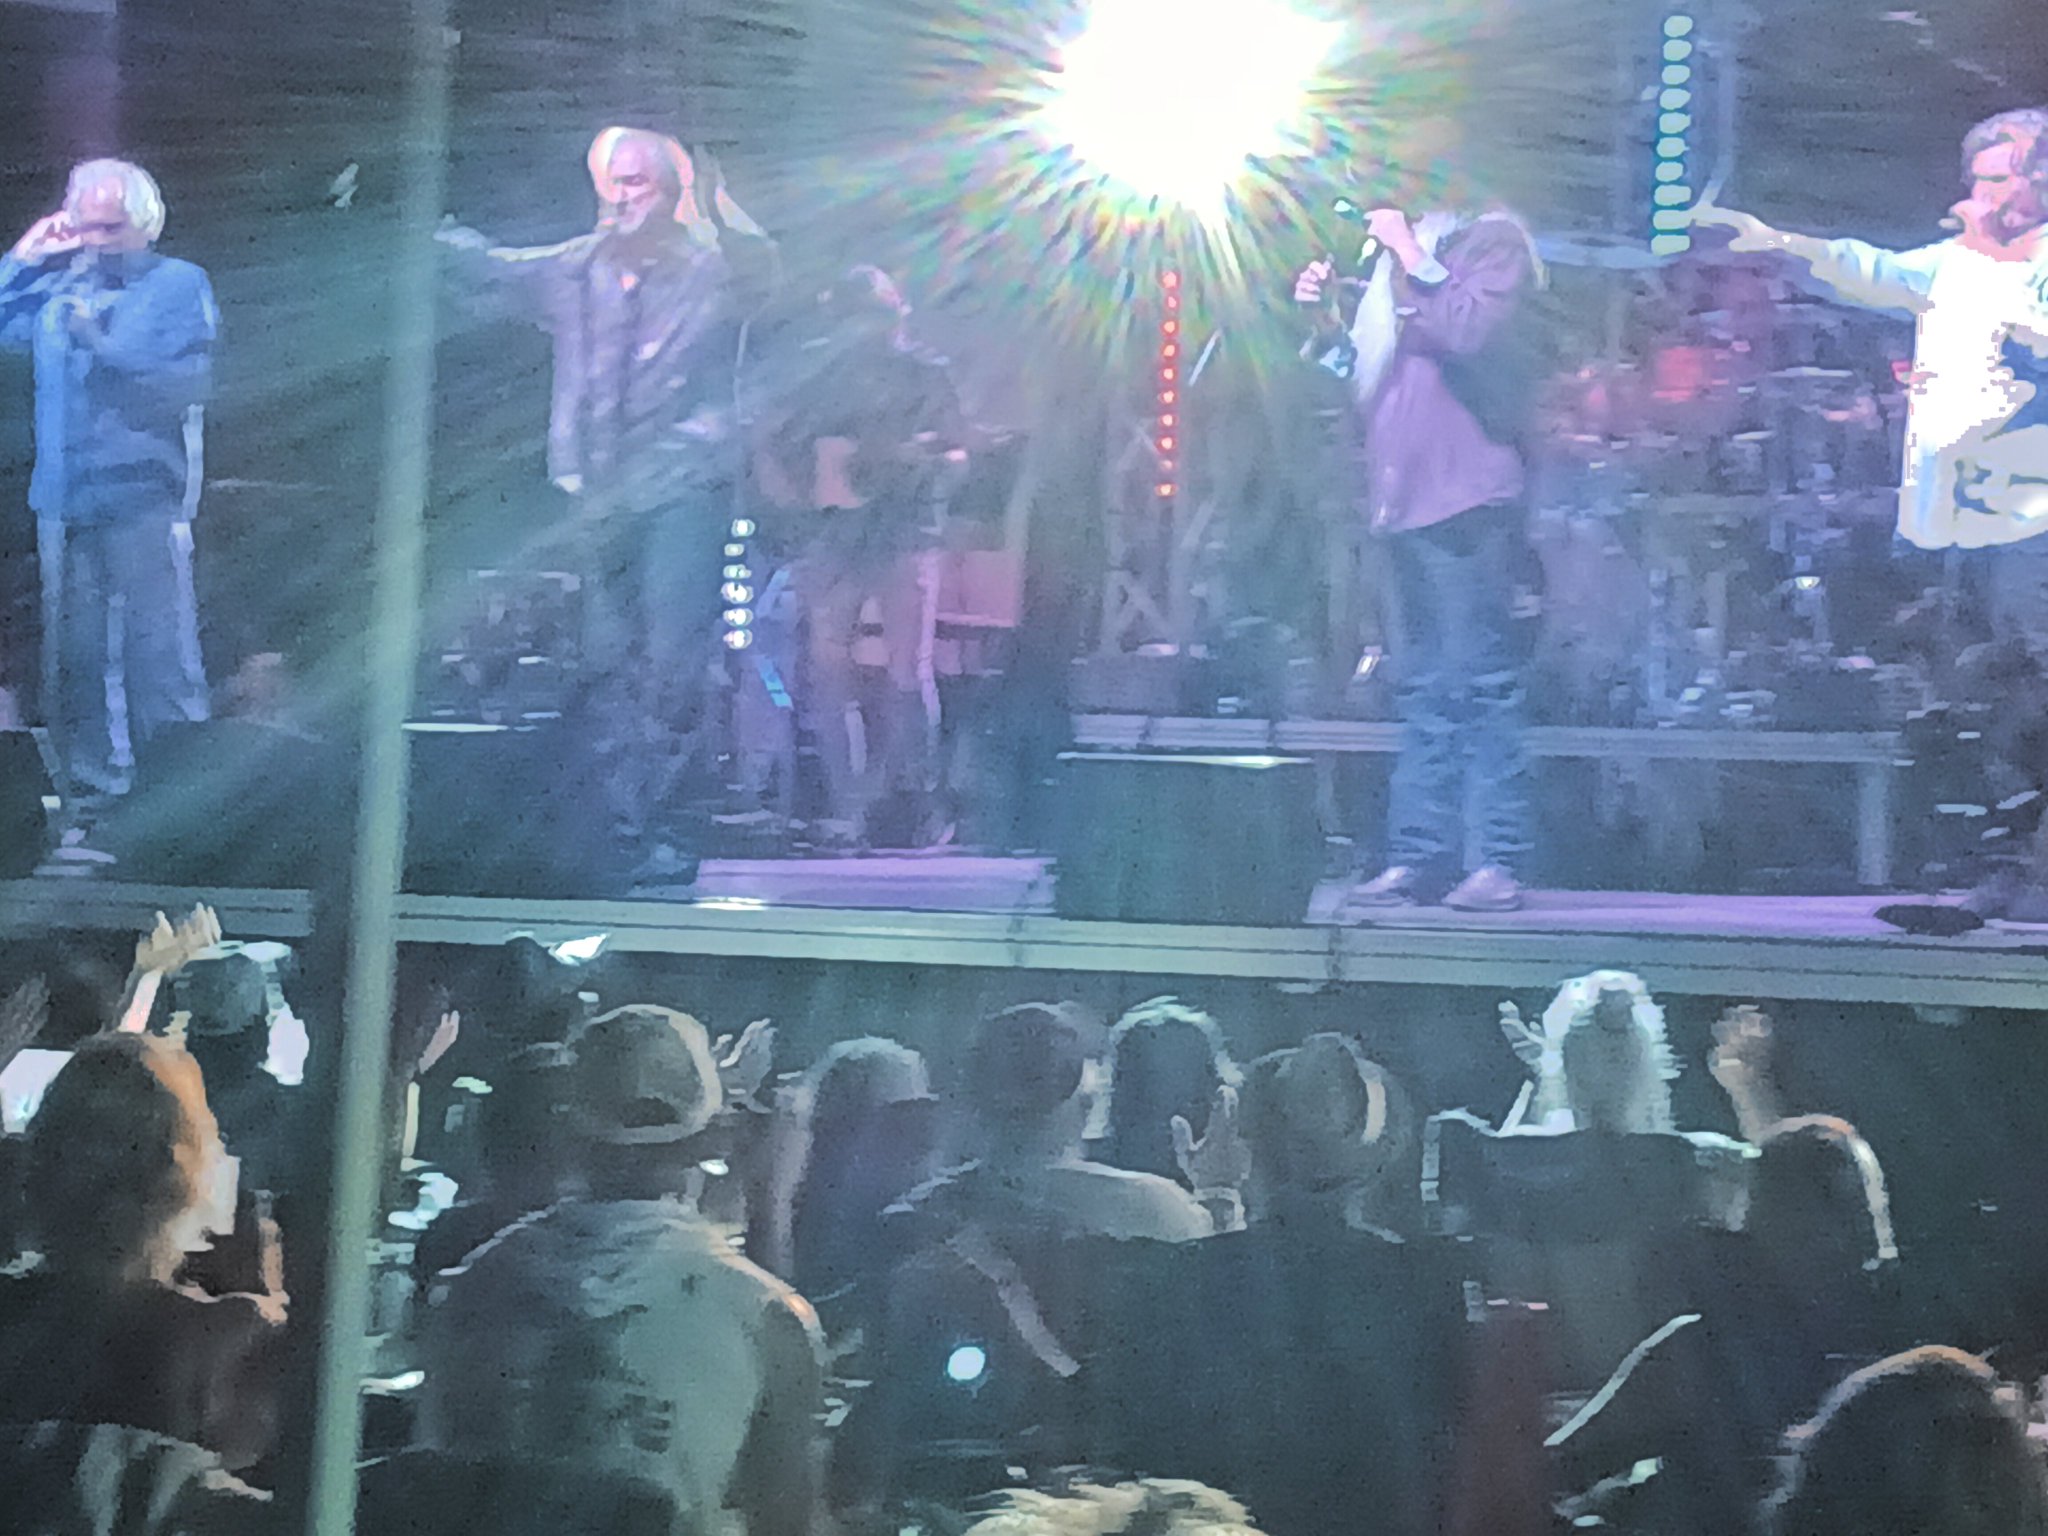 Had the BEST time tonight seeing @oakridgeboys  play in Center Al!! @joebonsall sounded awesome! Thank you for the great show! https://t.co/UM8OOId6ud